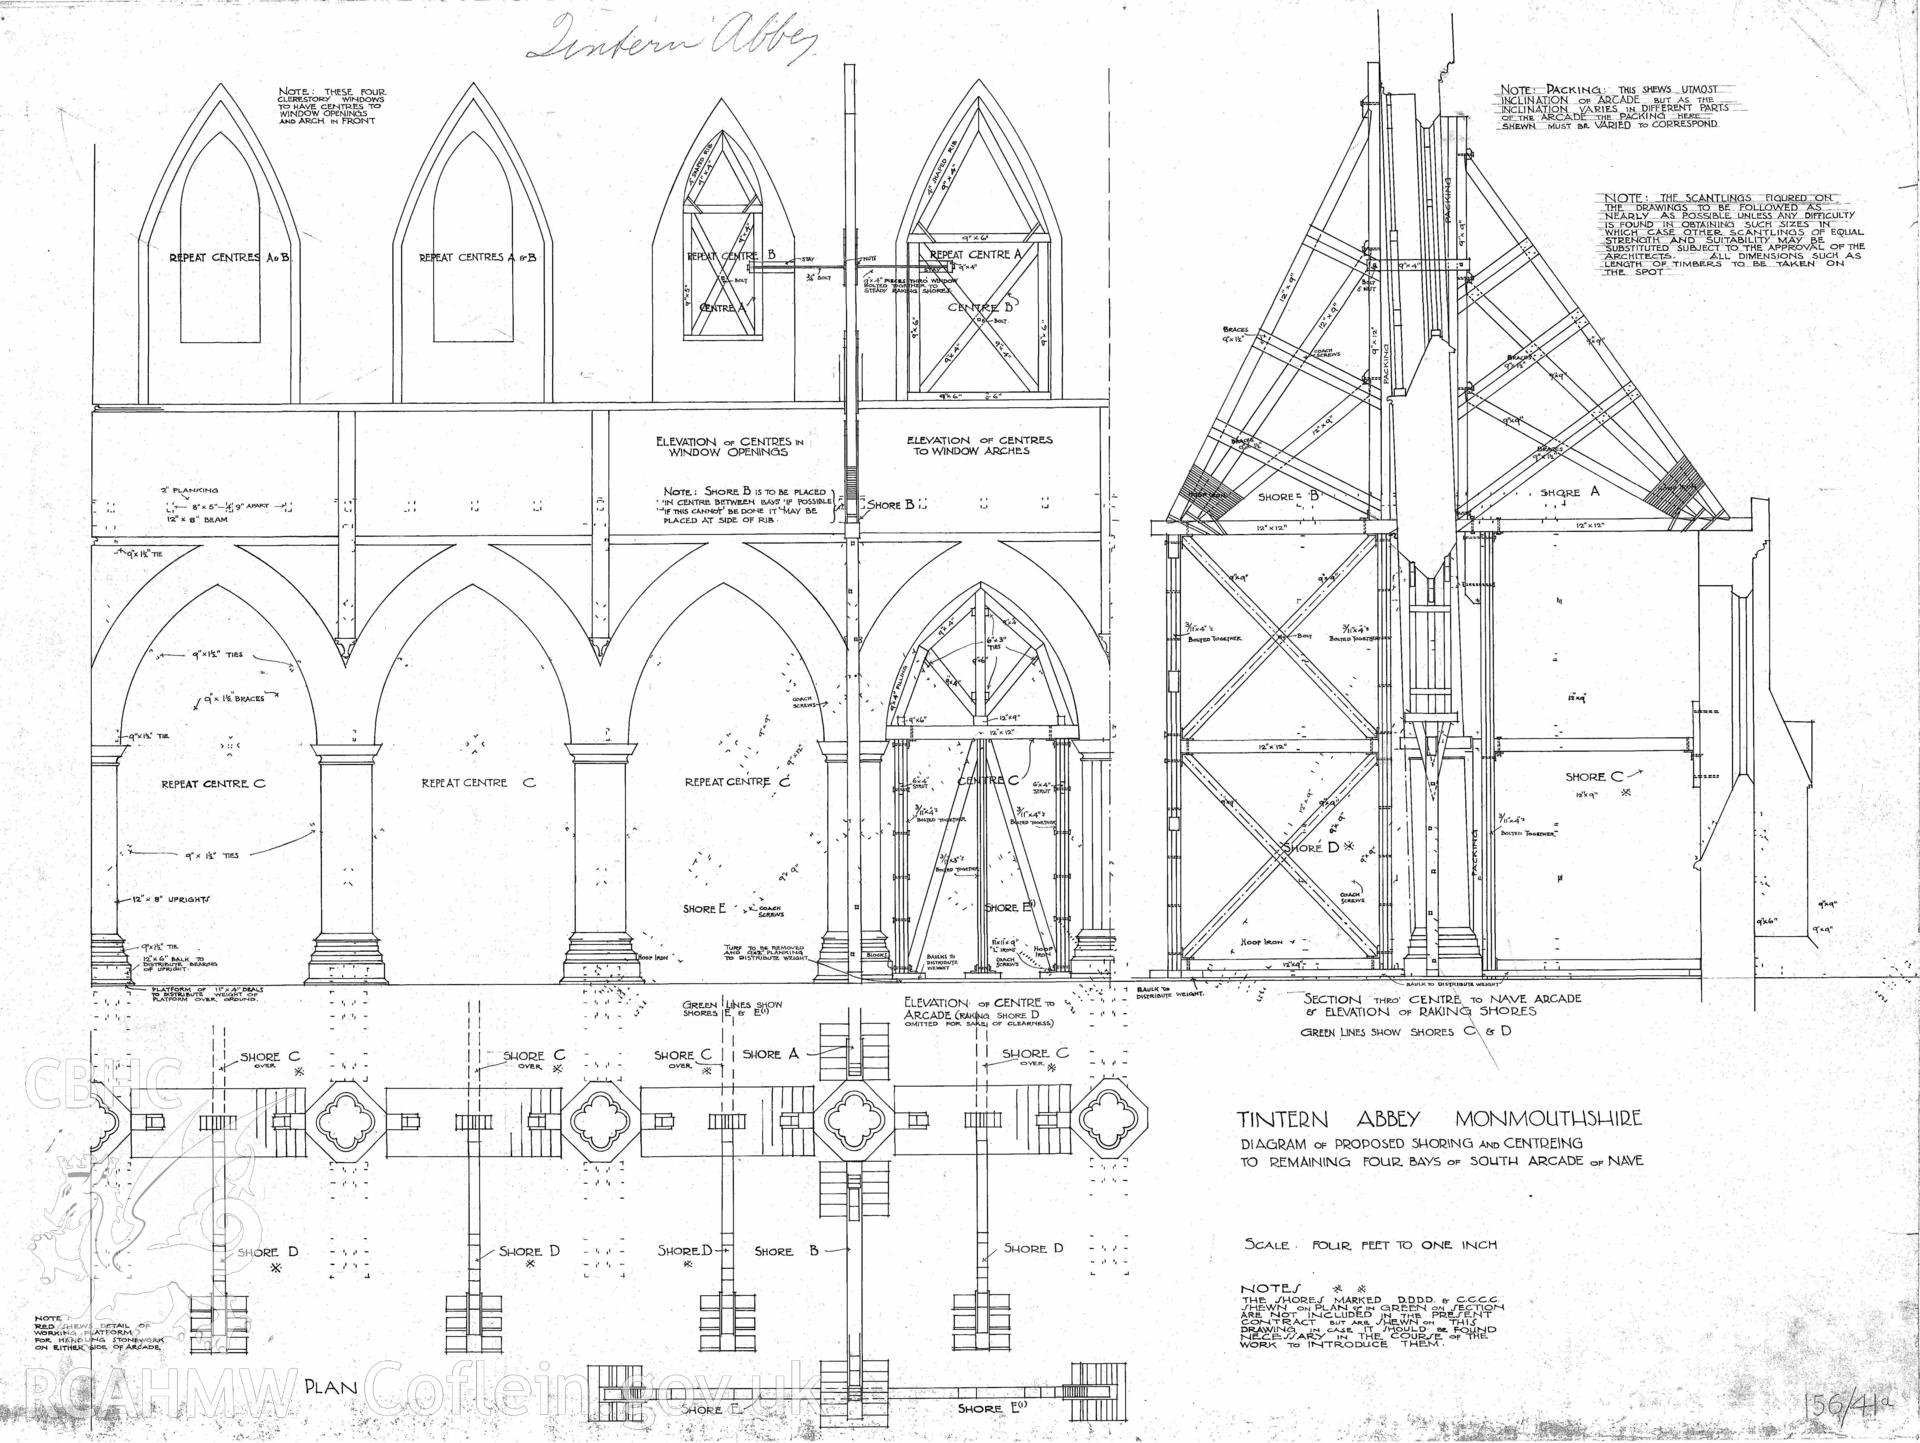 Cadw guardianship monument drawing of Tintern Abbey. Proposed shoring S Arcade of Nave. Cadw ref. No. 156/41a. Scale 1:48.